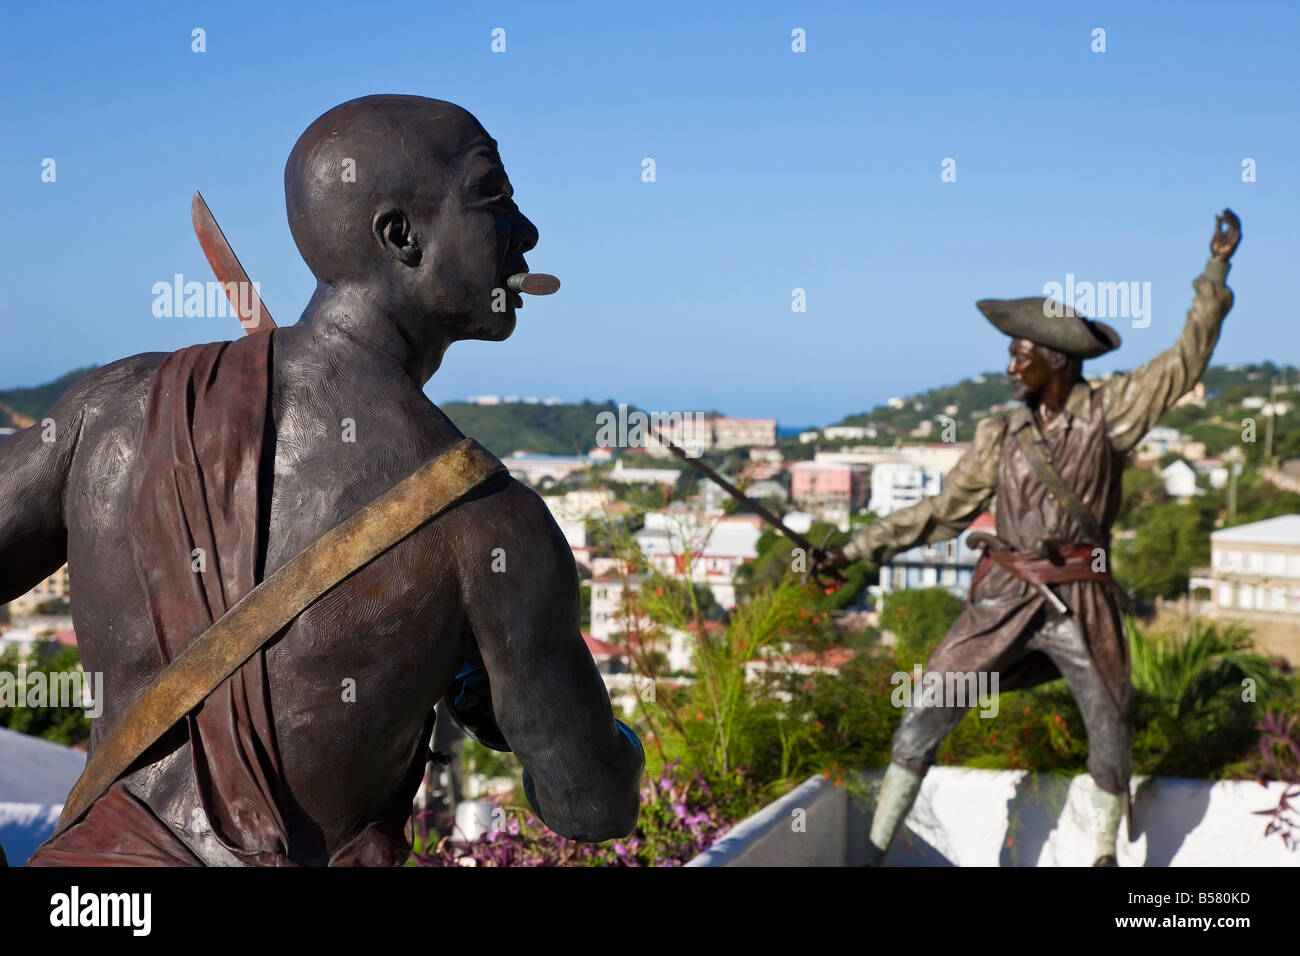 Sculpture in Blackbeard's Castle, one of four National Historic sites in the US Virgin Islands, St. Thomas, Caribbean Stock Photo